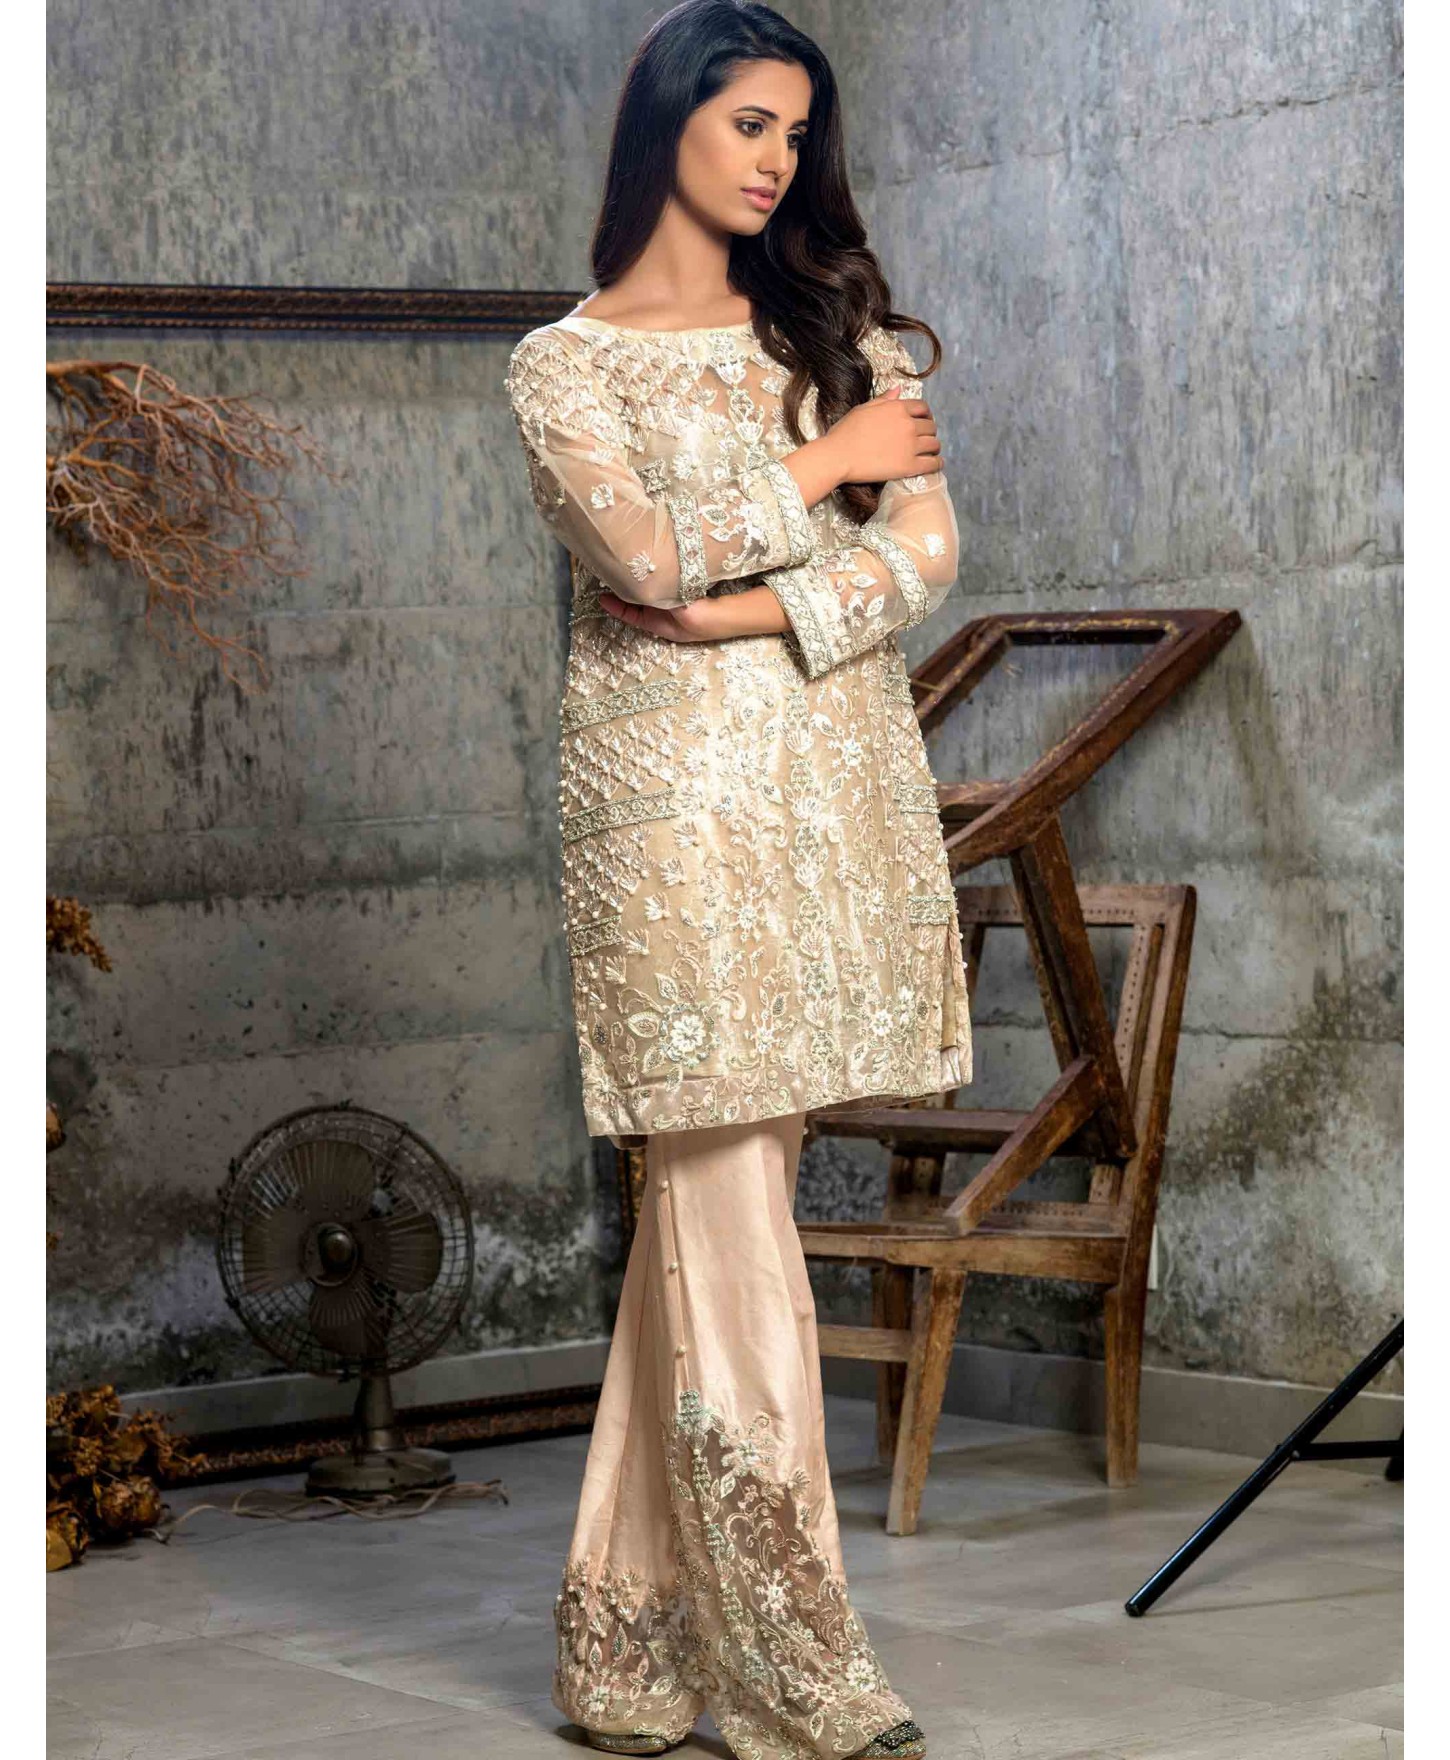 Buy this elegant and ravishing Pakistani formal dress by Crates by Pasho available online